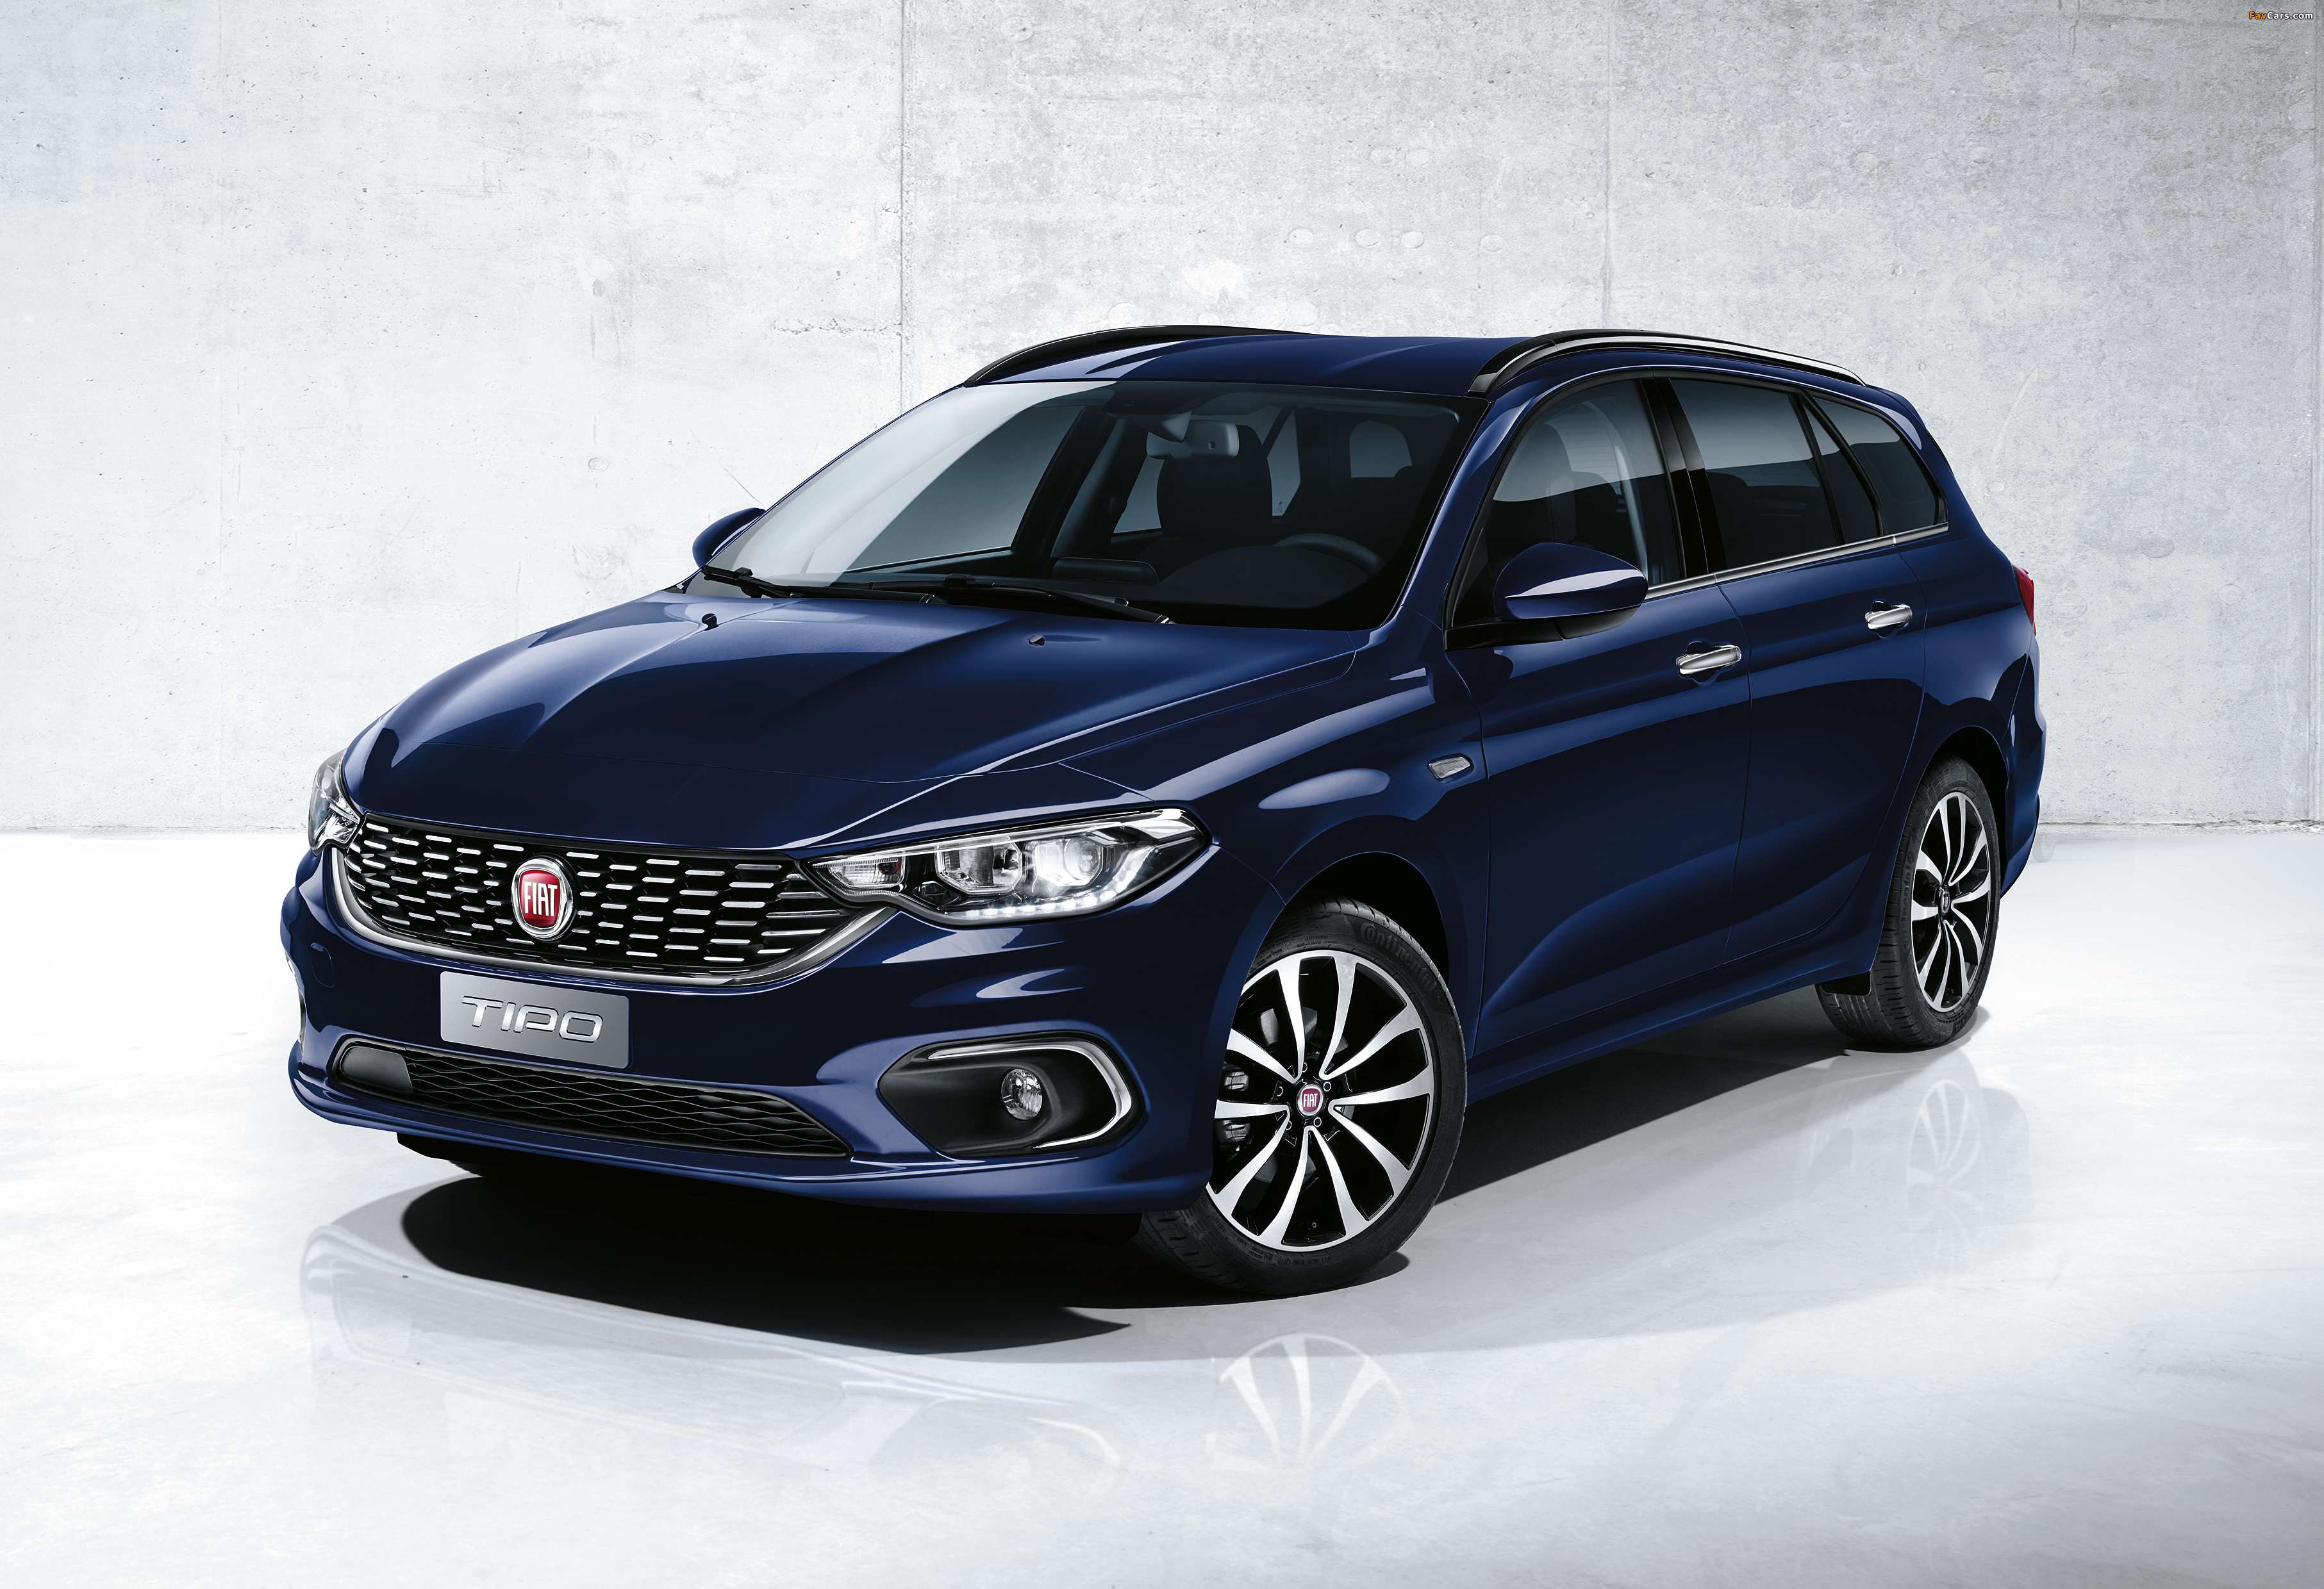 Fiat Tipo Station Wagon (357) 2016 images (3626 x 2480)